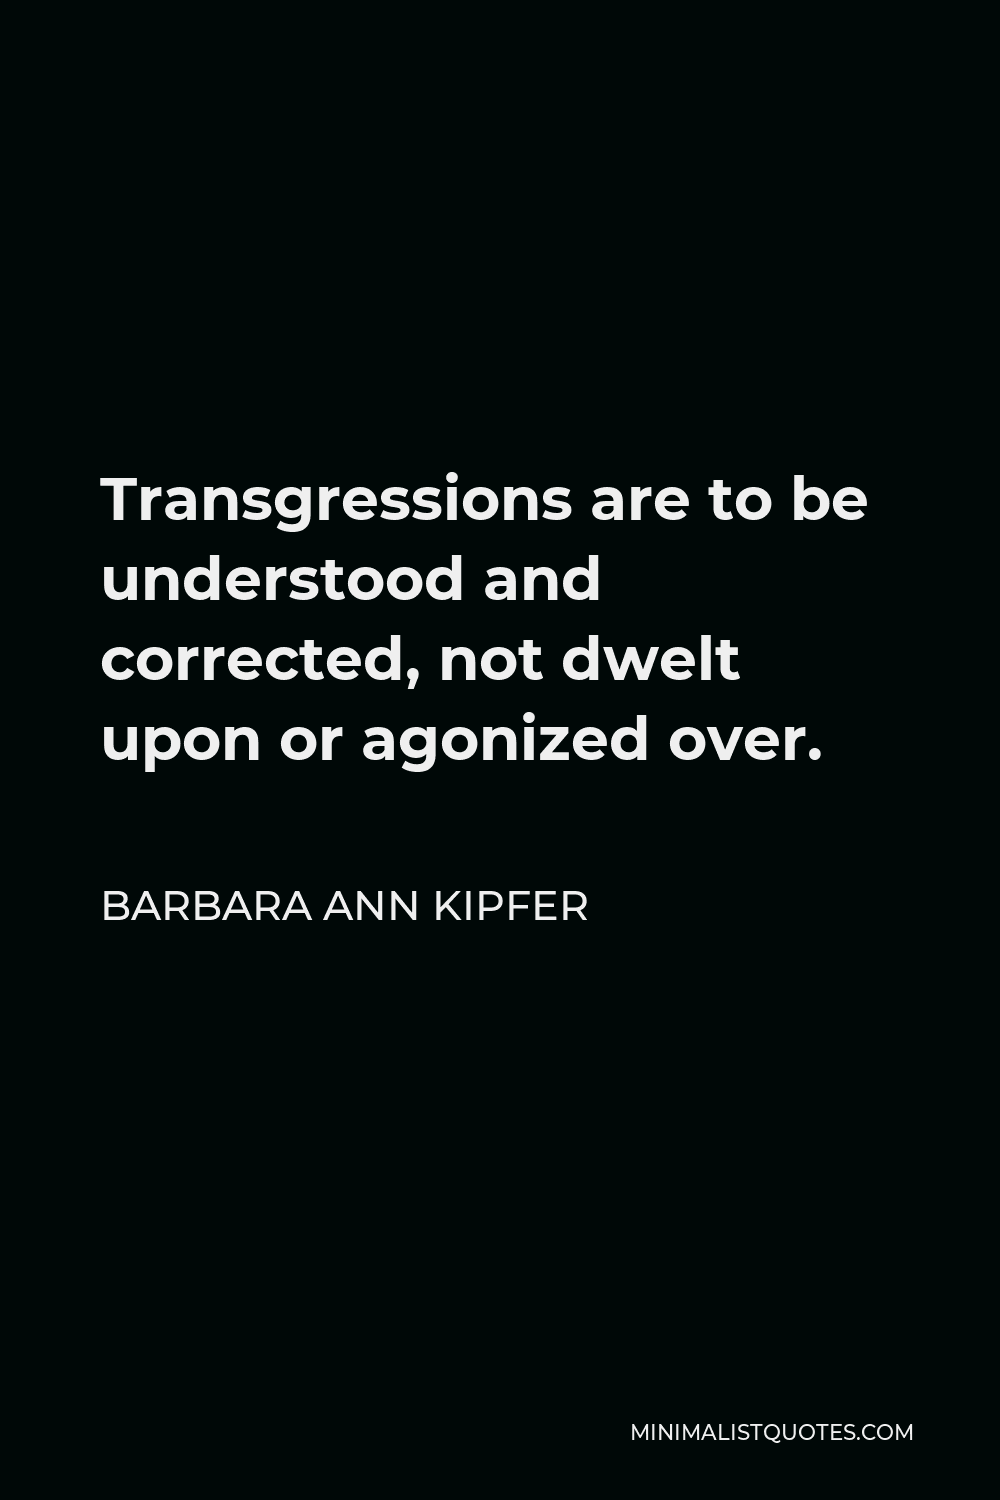 Barbara Ann Kipfer Quote - Transgressions are to be understood and corrected, not dwelt upon or agonized over.